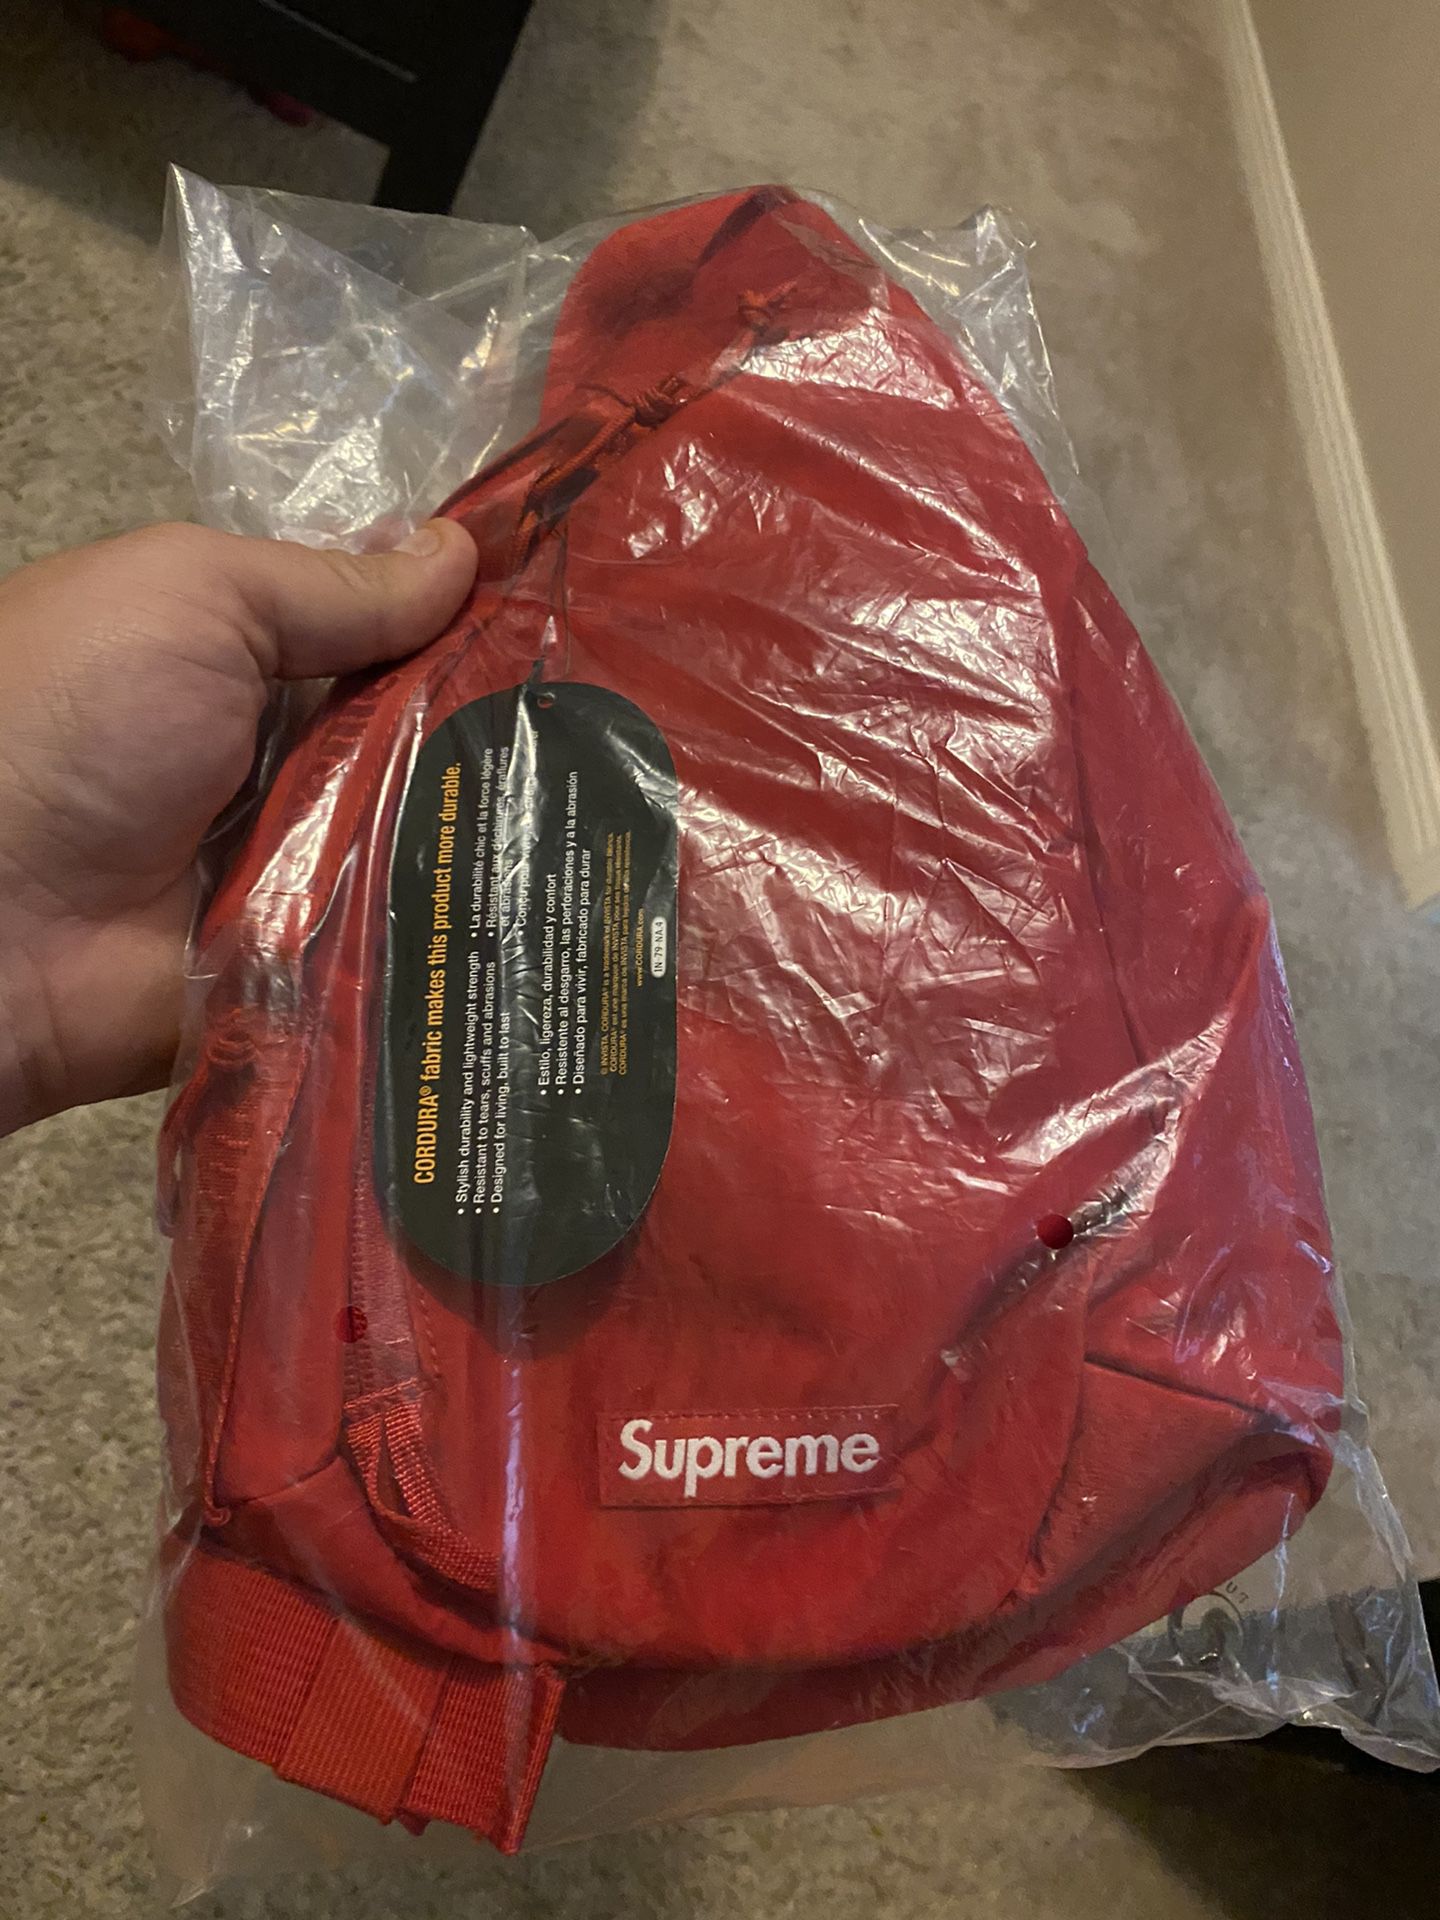 SUPREME SLING BAG SOLD OUT QTY. 1